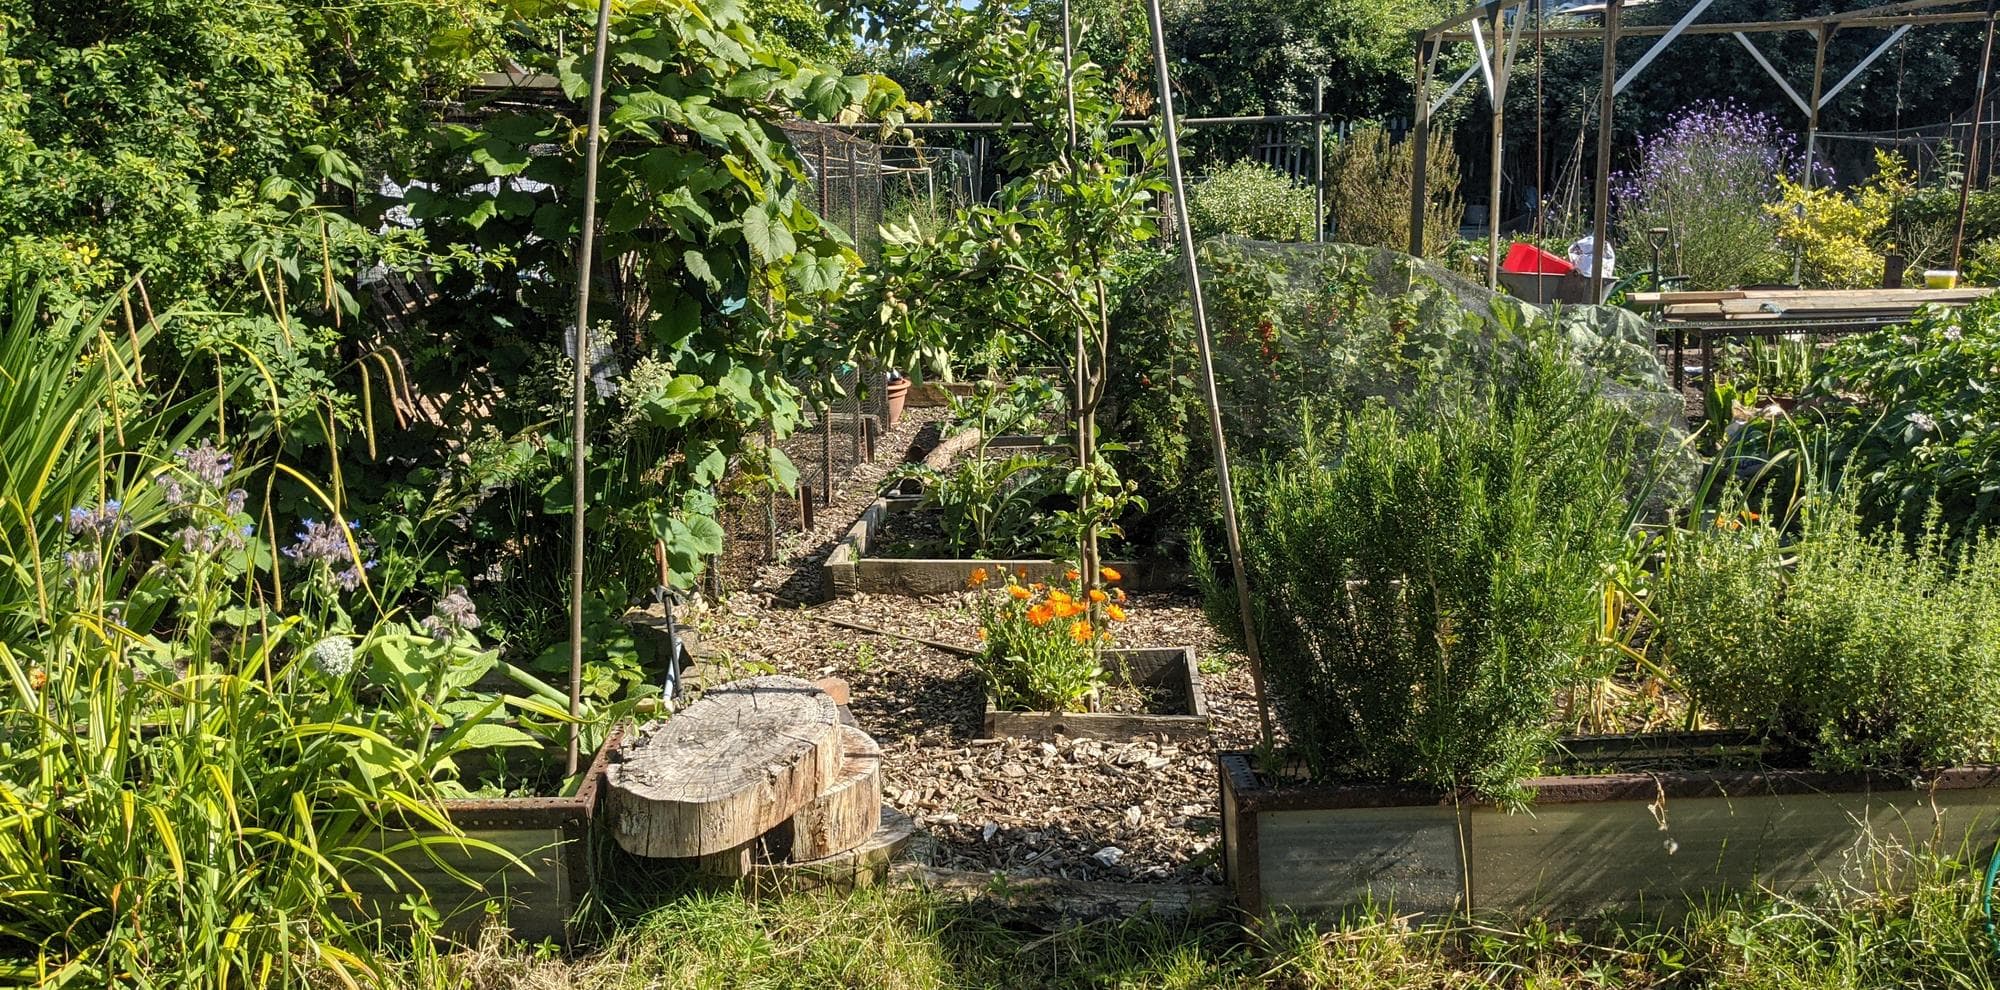 An allotment with plants and flowers.